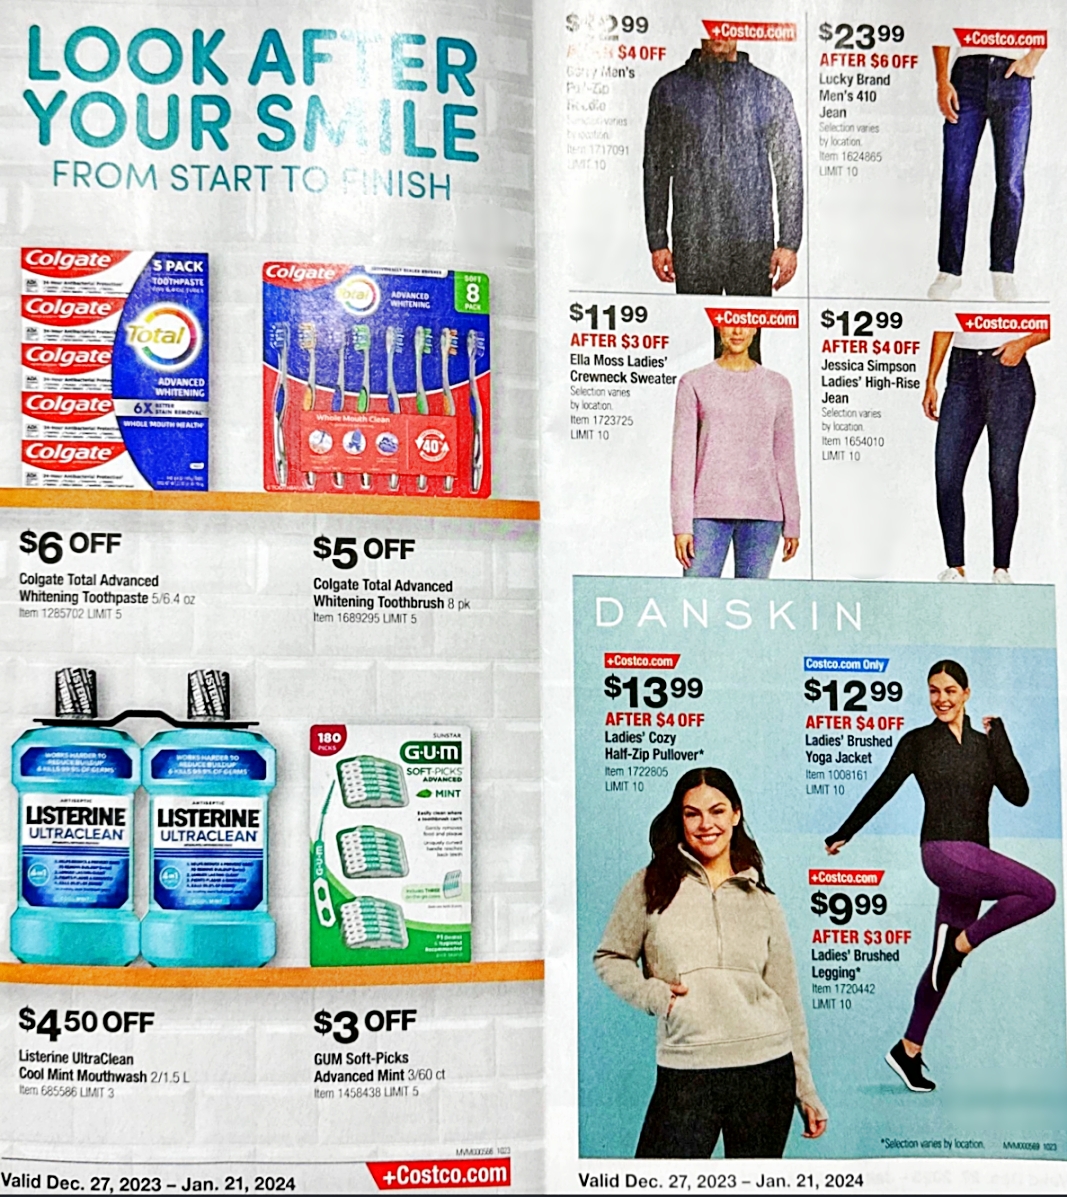 Costco Coupon Book JANUARY 2024 Pages 8 and 9